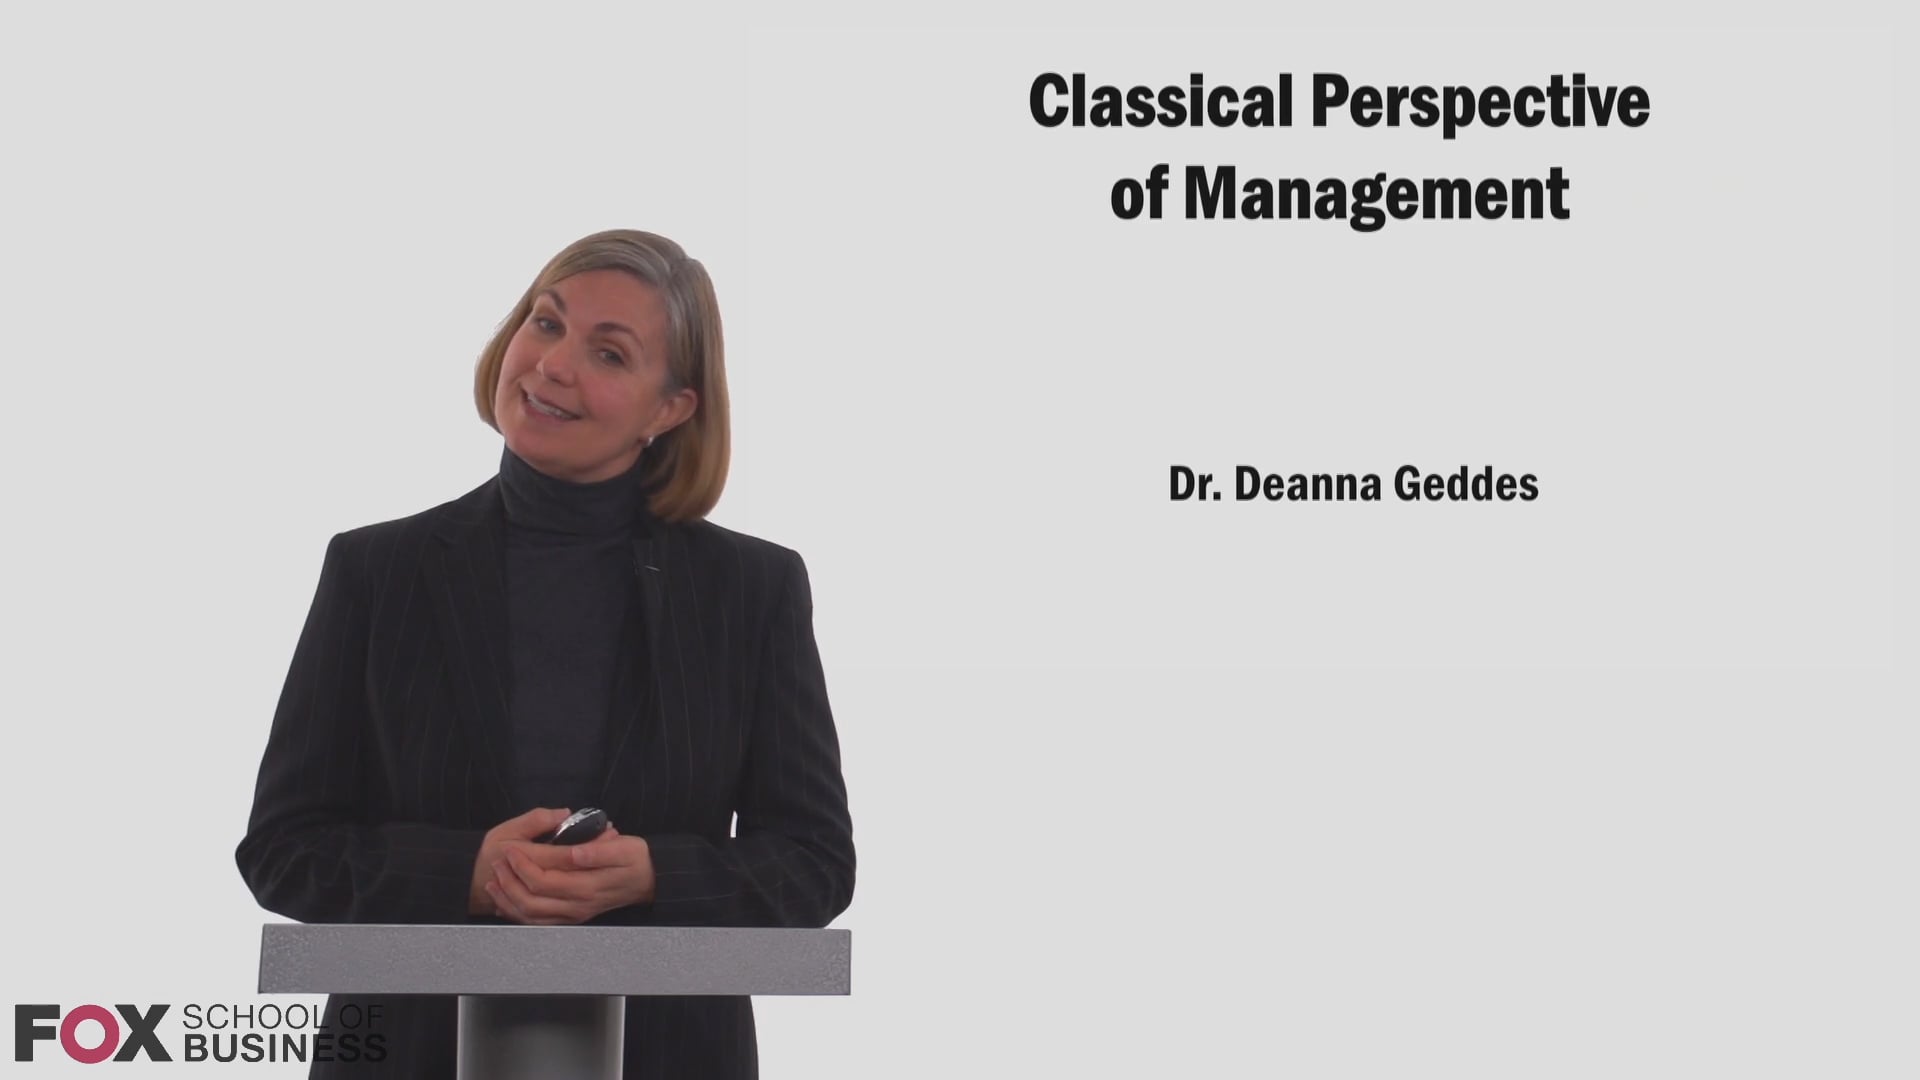 Classical Perspective of Management